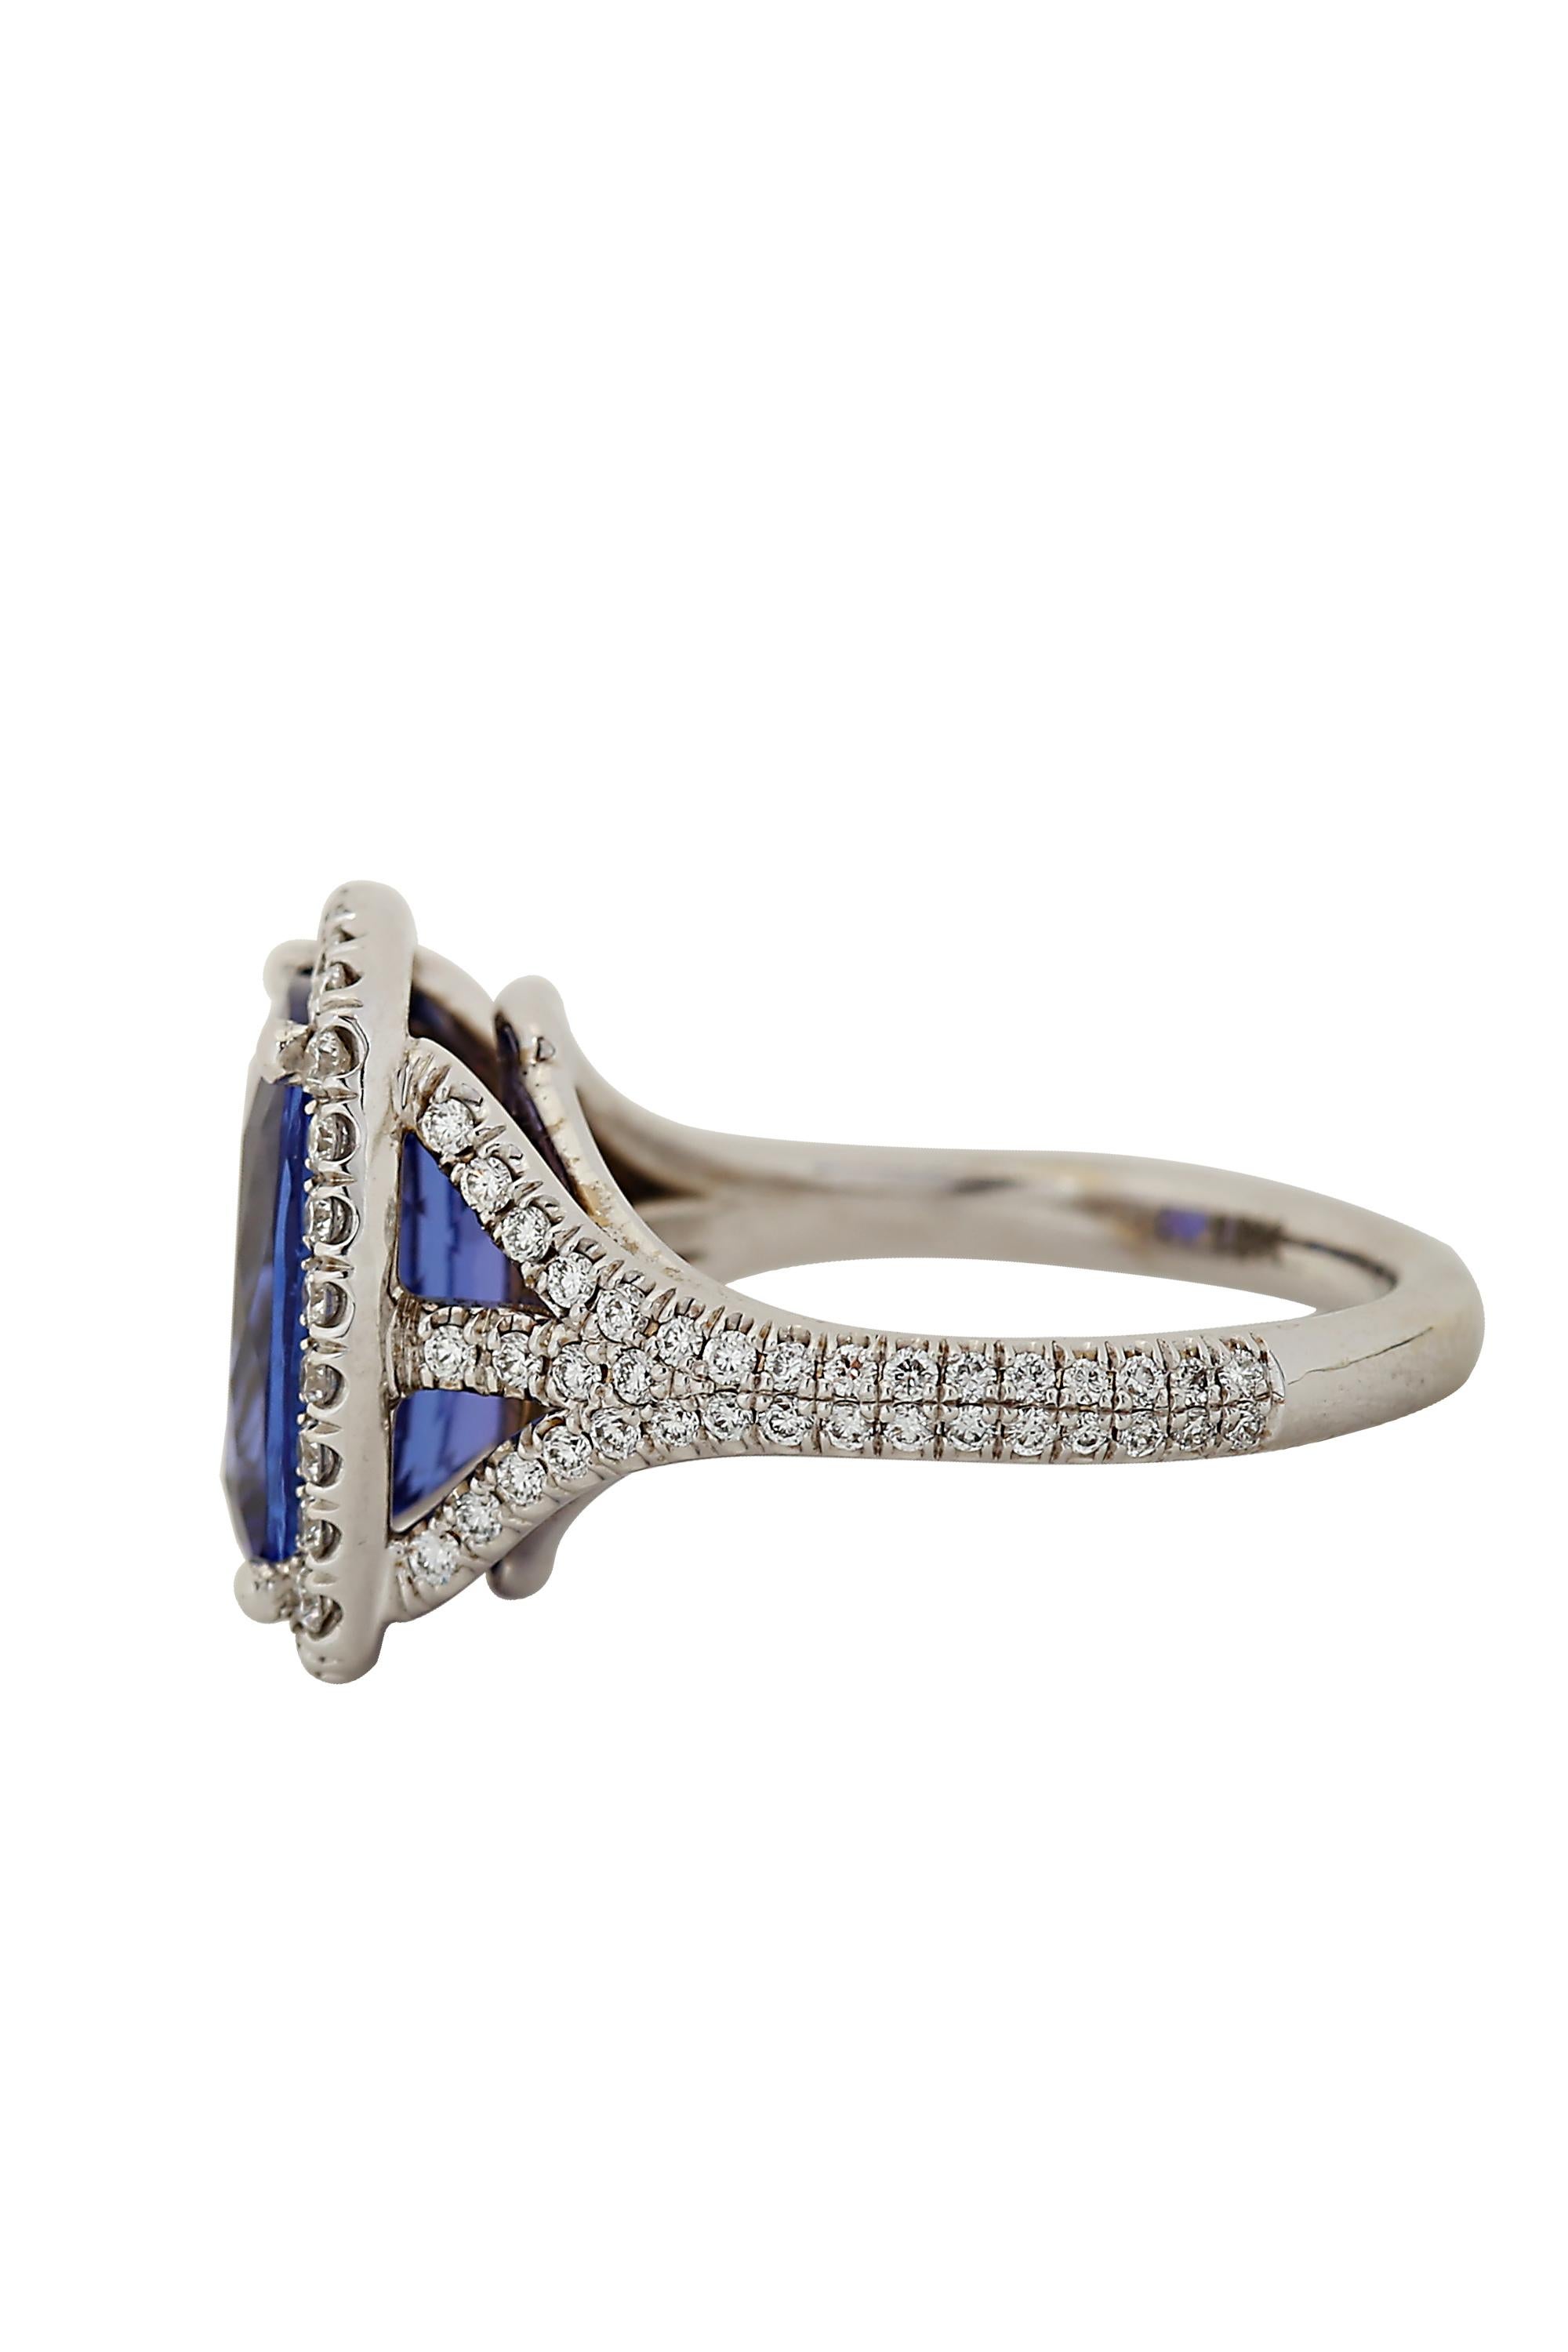 This stunning and vibrant contemporary ring features a rich, jewel toned violet
tanzanite highlighted by an exceptional 18 karat white gold and micro pavé
setting. The center Tanzanite weighs 5.72 carats and the mounting is set with 2 carats of